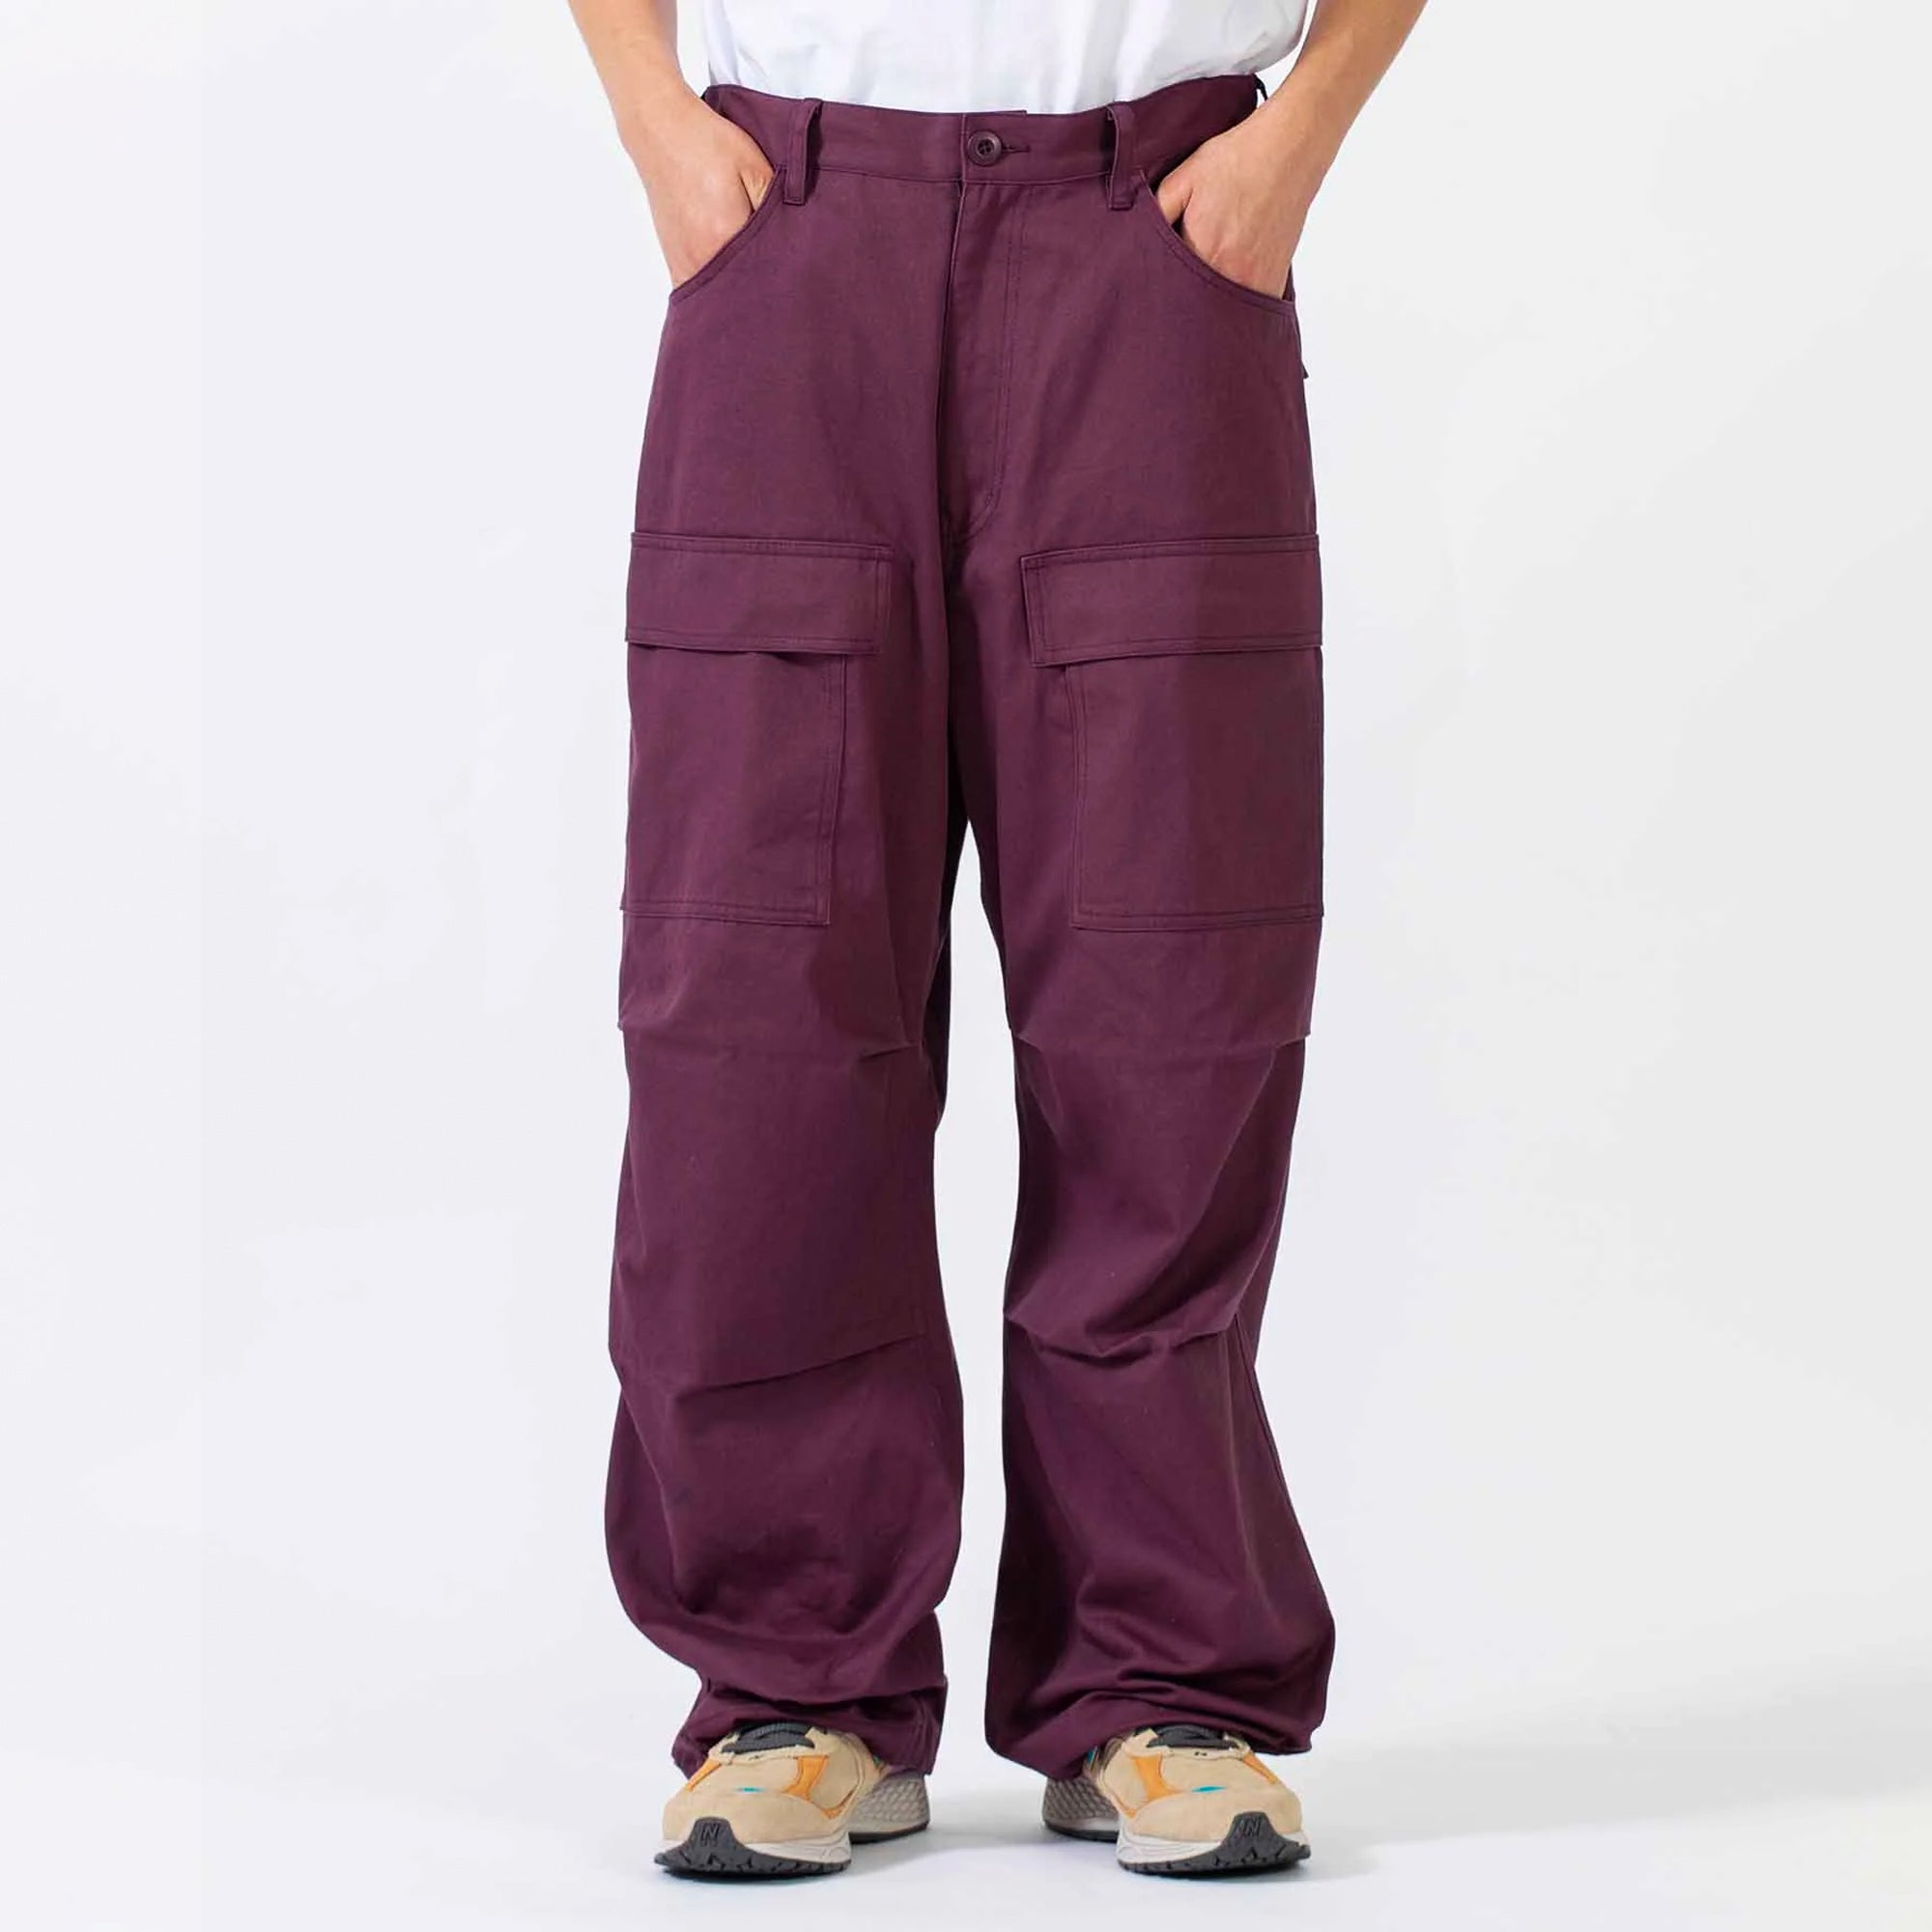 Cotton Cargo Trouser 6 Pocket ( Skin ) – Noon Seen Clothing Brand